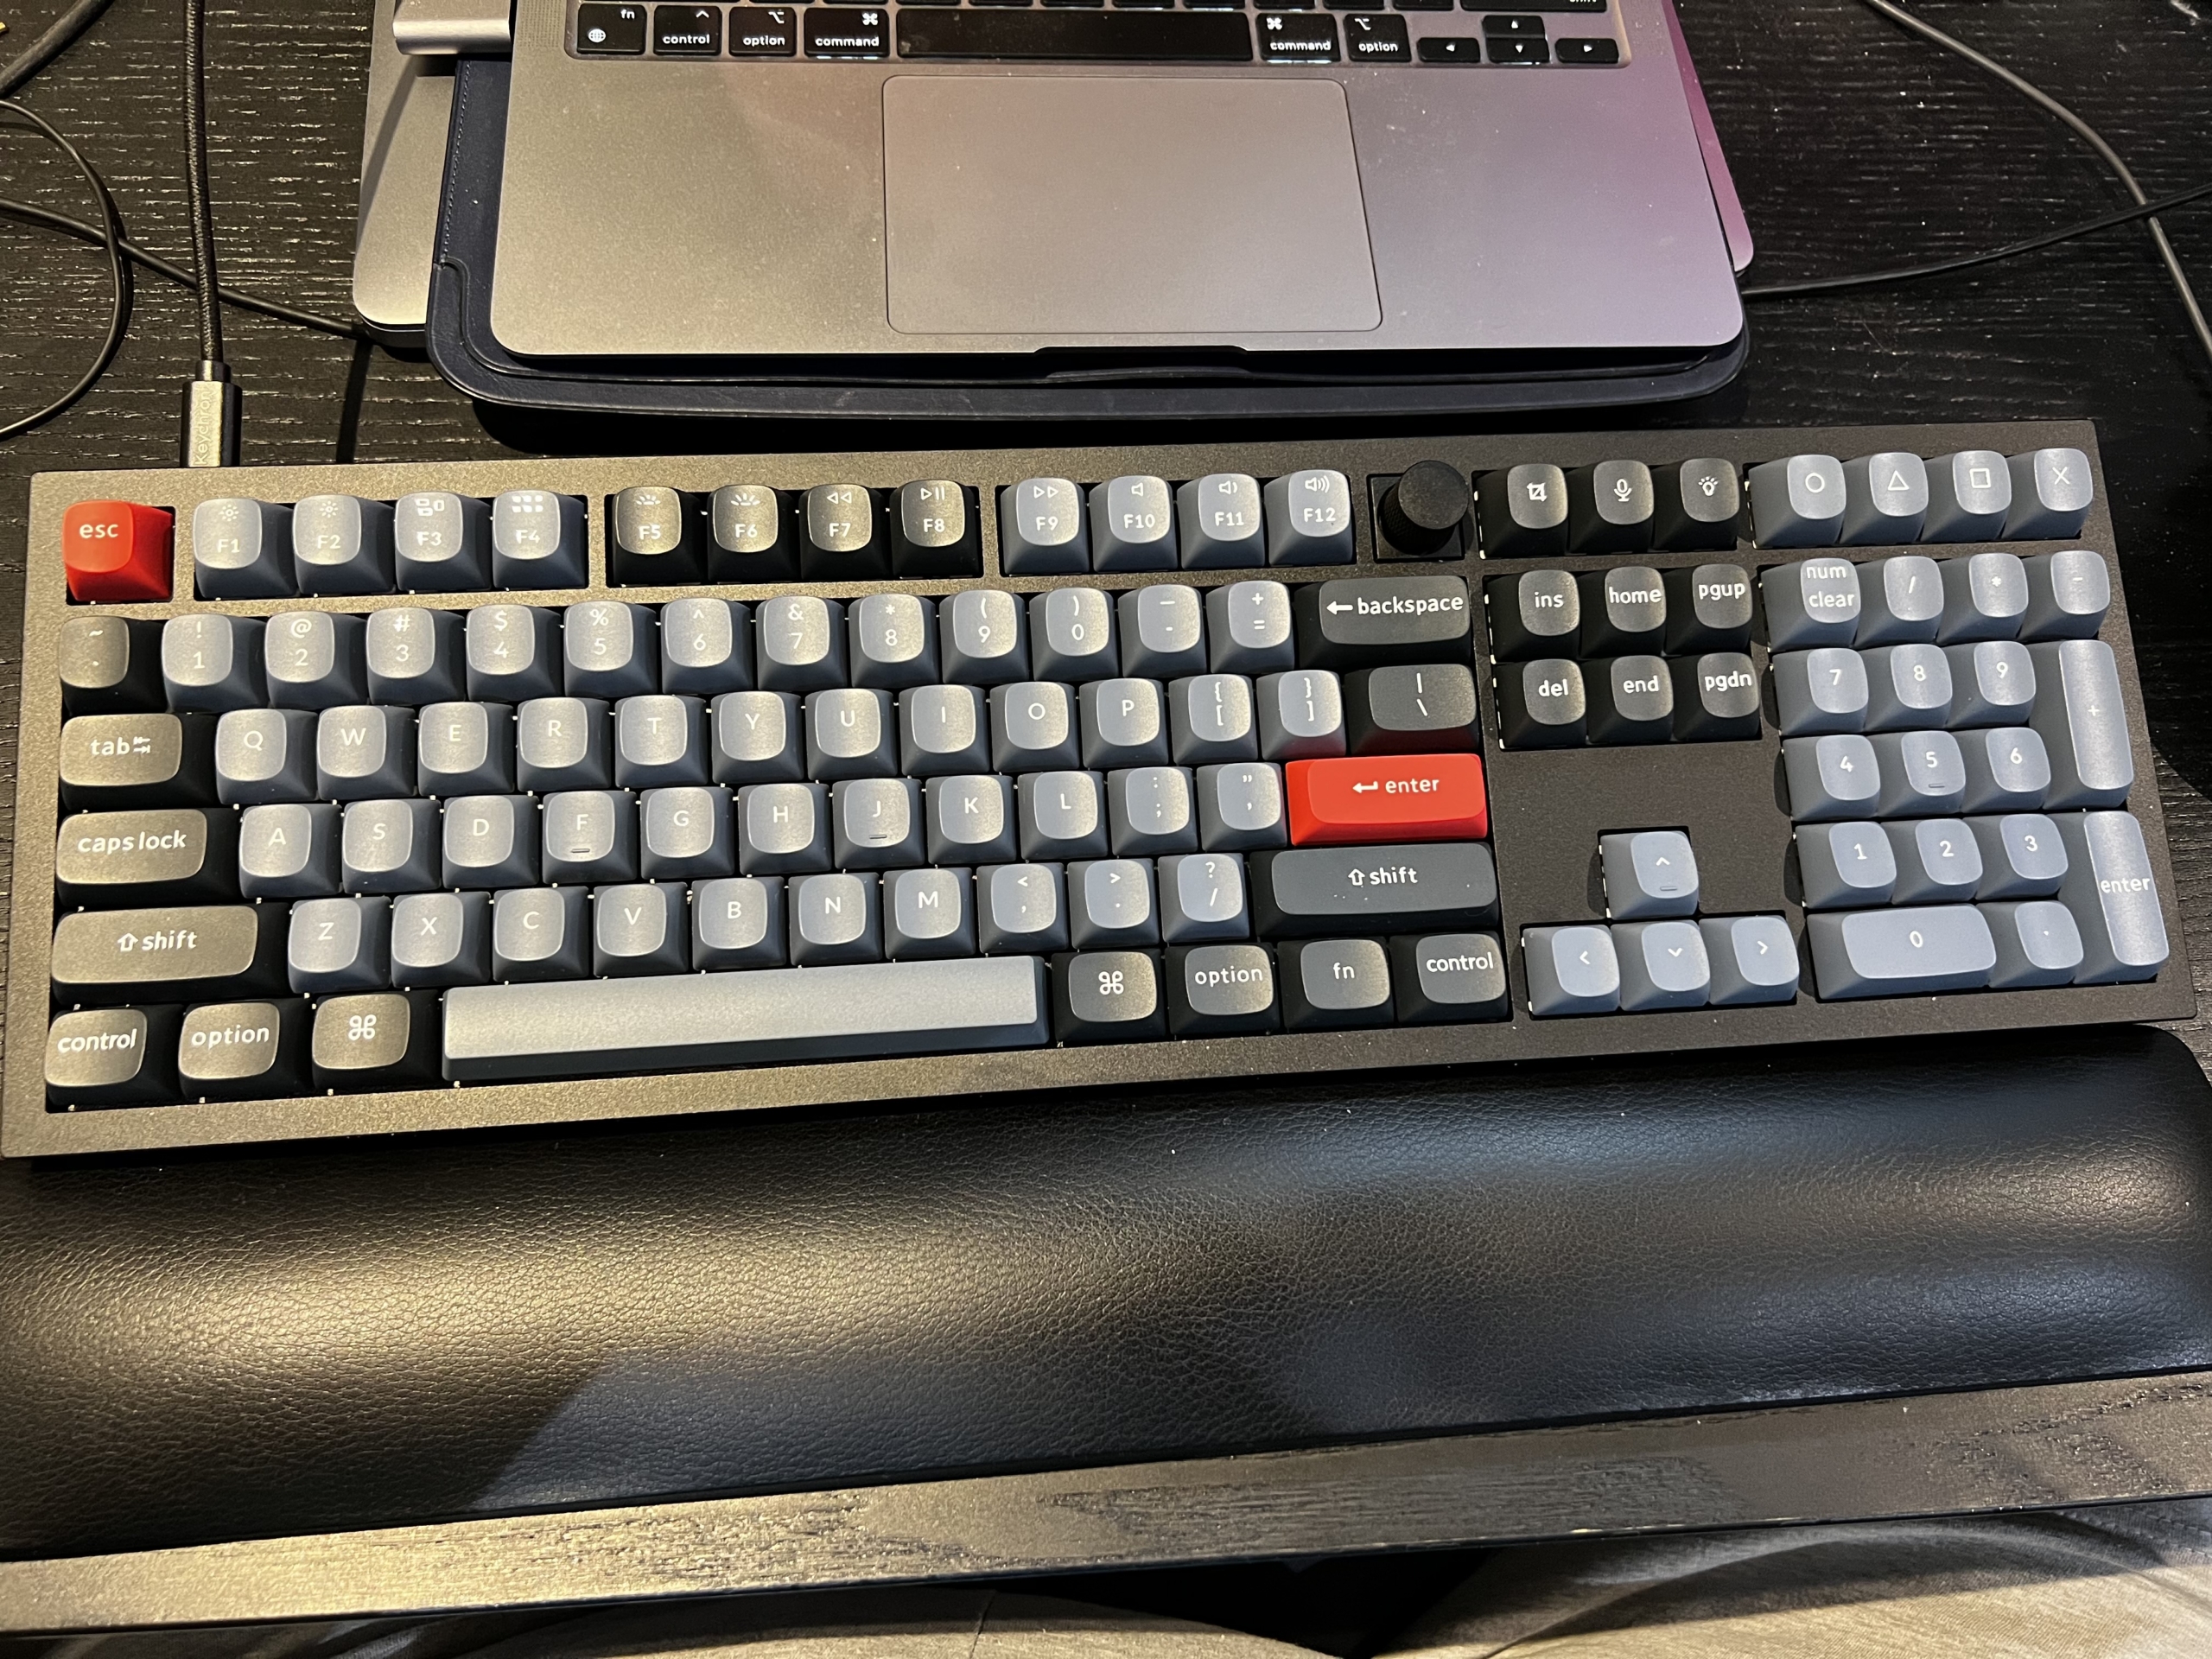 A picture of a Keychron Q6 keyboard